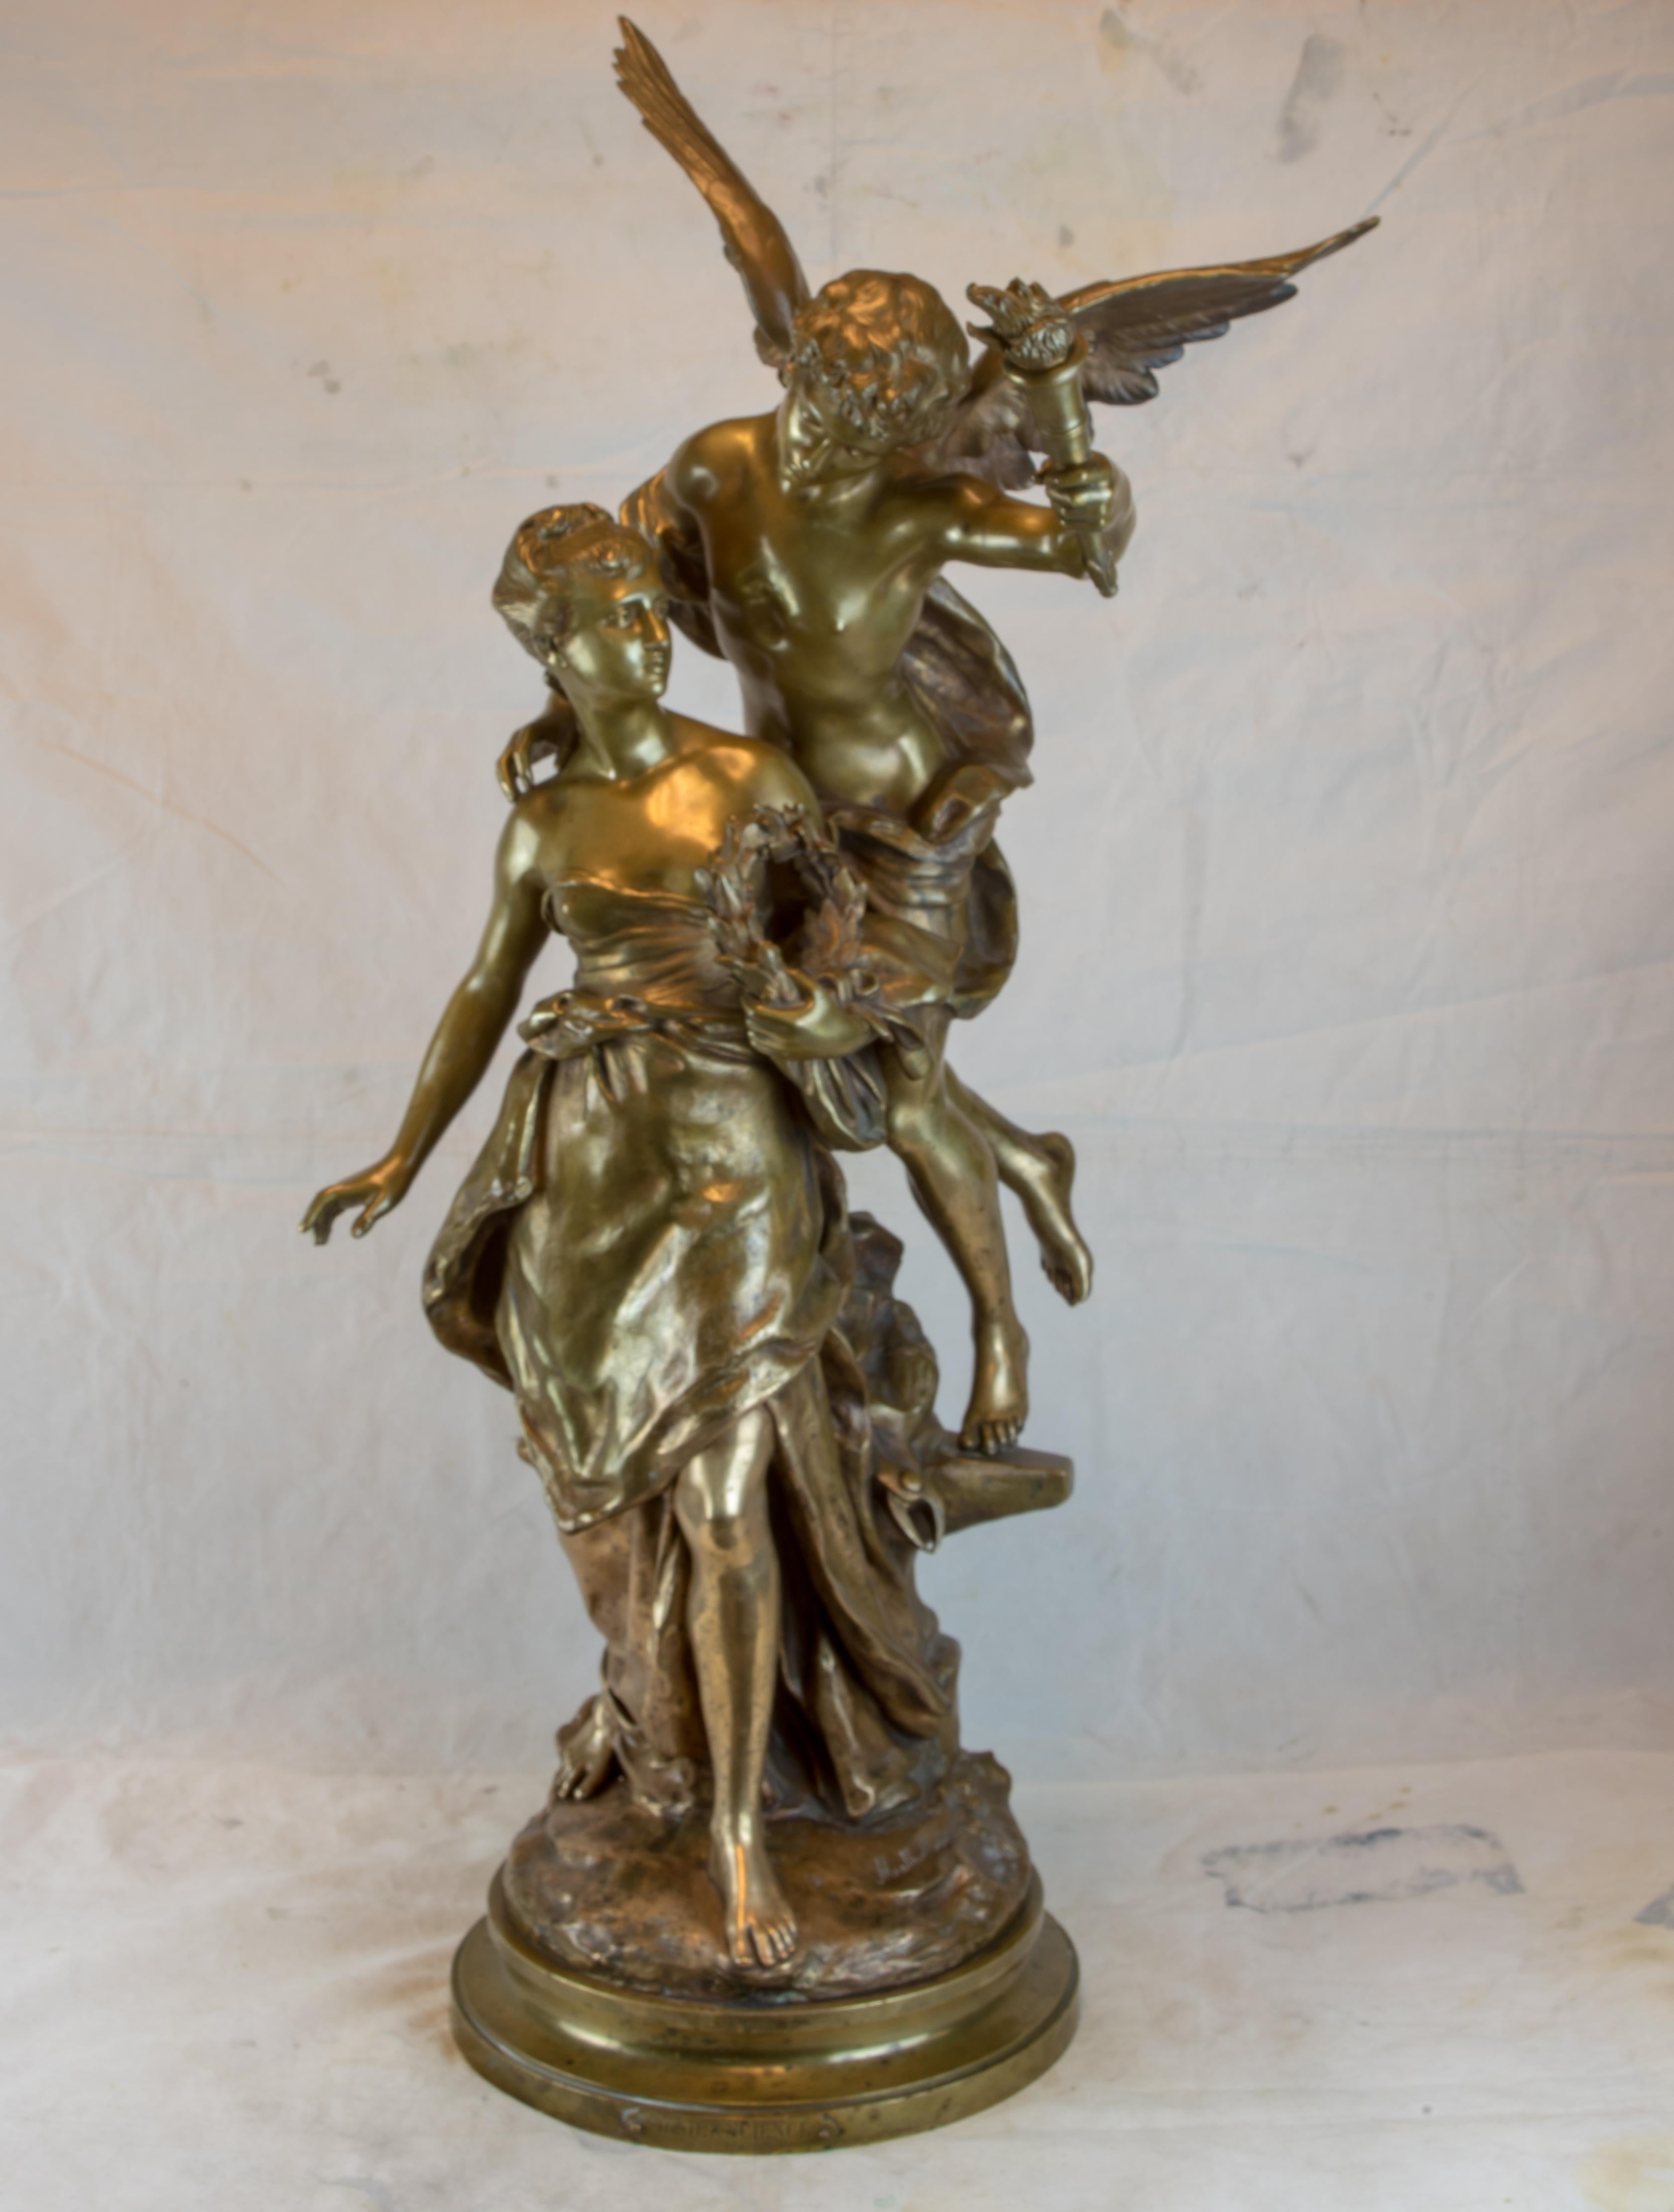 Bronze figural grouping of a Génie and Science, a woman guided by an angel with outstretched wings by Mathurin Moreau, a celebrated and decorated French sculptor whose talents most fruitefully lie in the presentation and rendering of enchanting